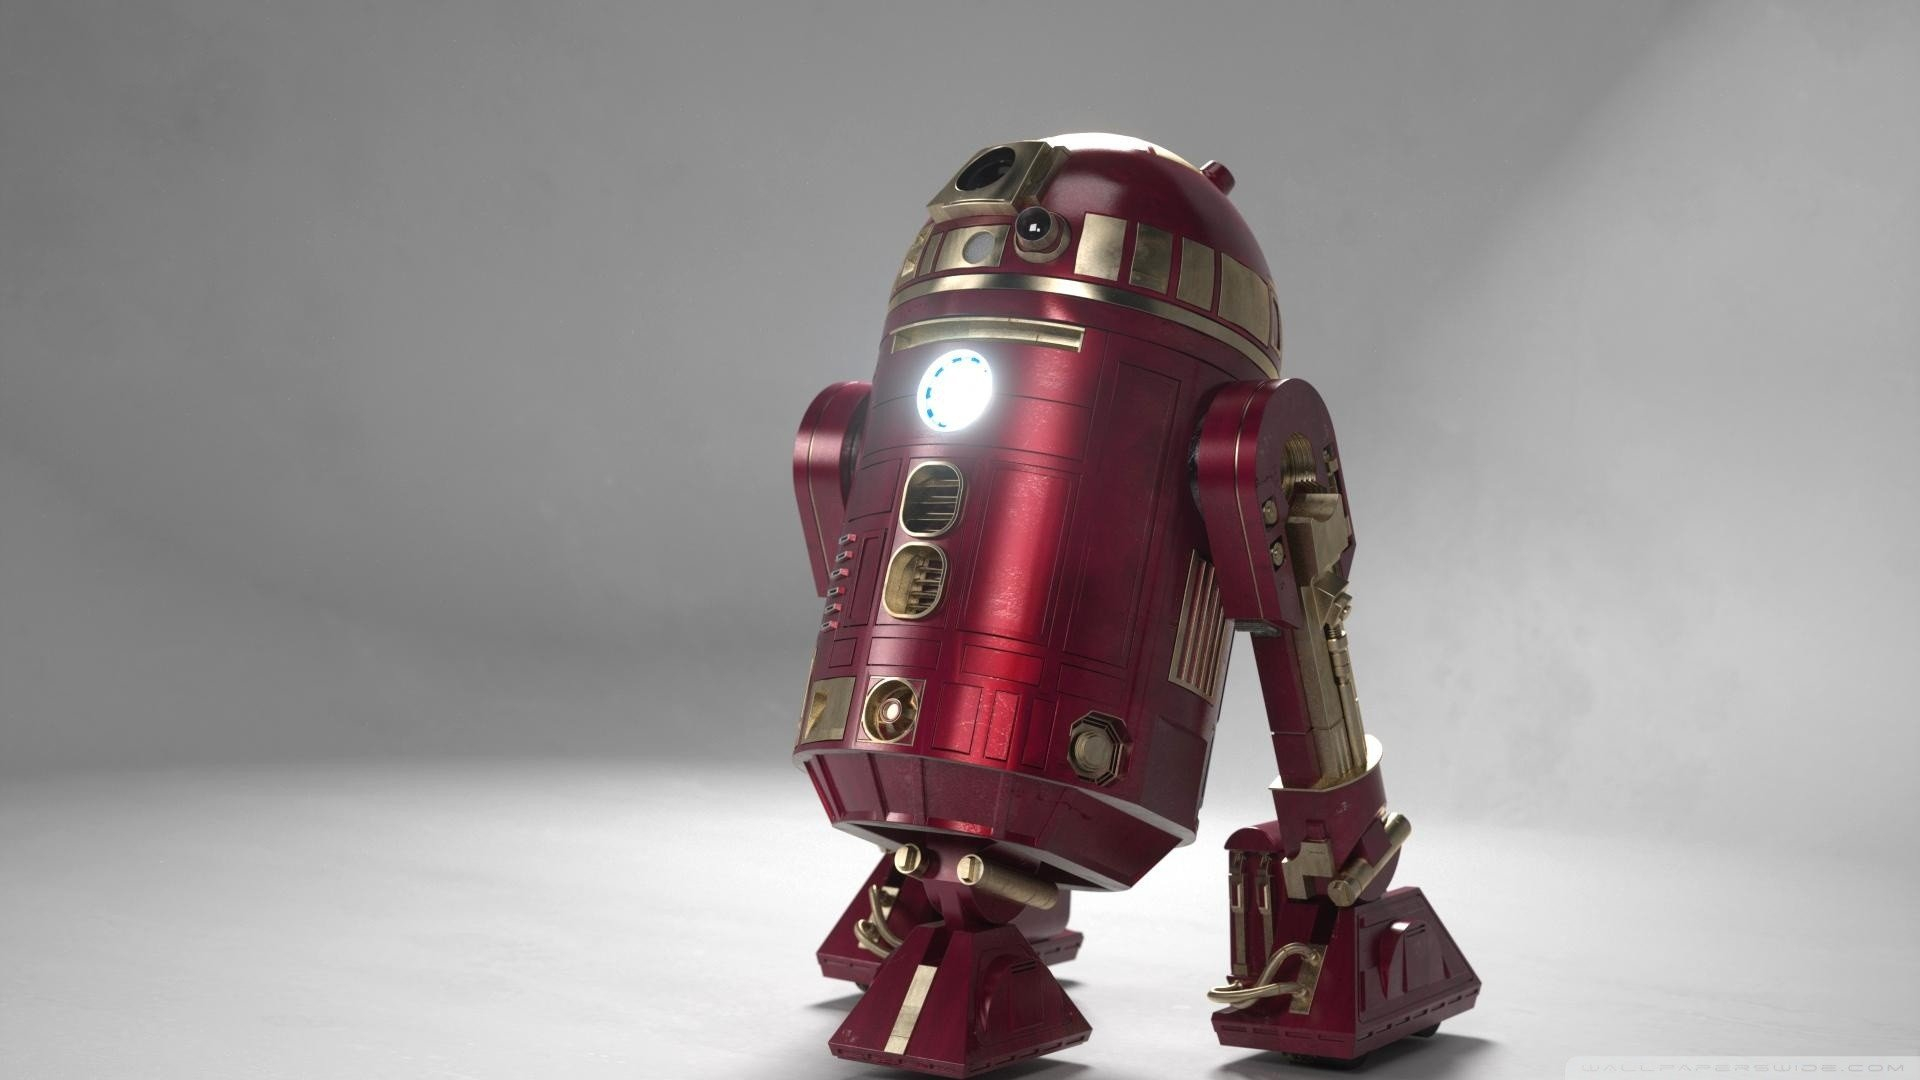 1920x1080 star, Wars, Iron, Man, R2d2 Wallpapers HD / Desktop and Mobile Backgrounds